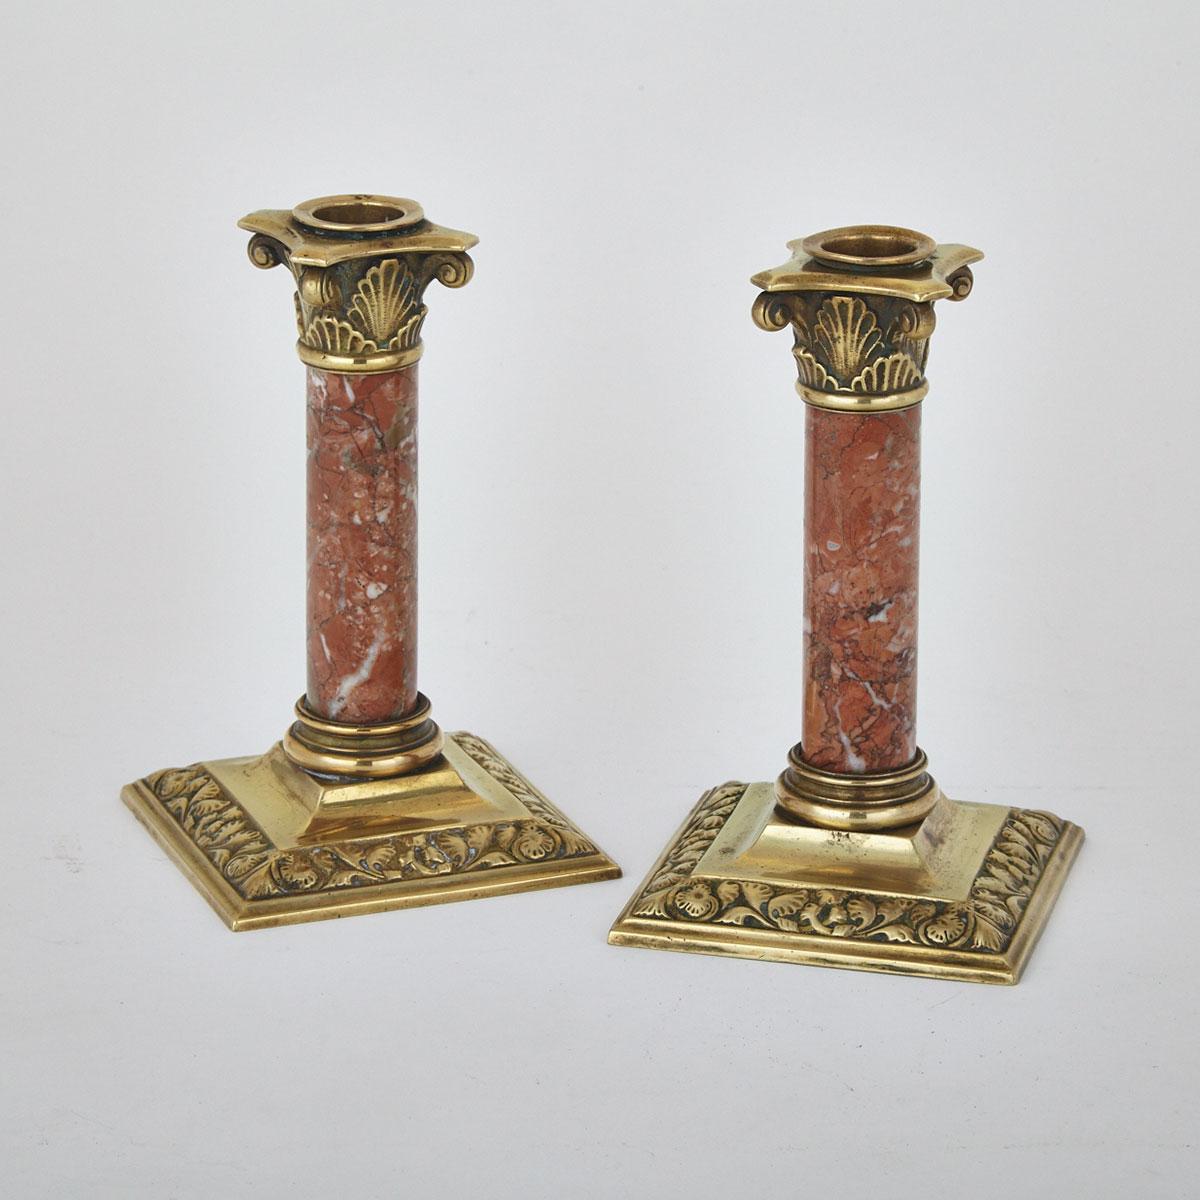 Pair of Italian Brass and Marble Column Form Candlesticks, 19th/early 20th century